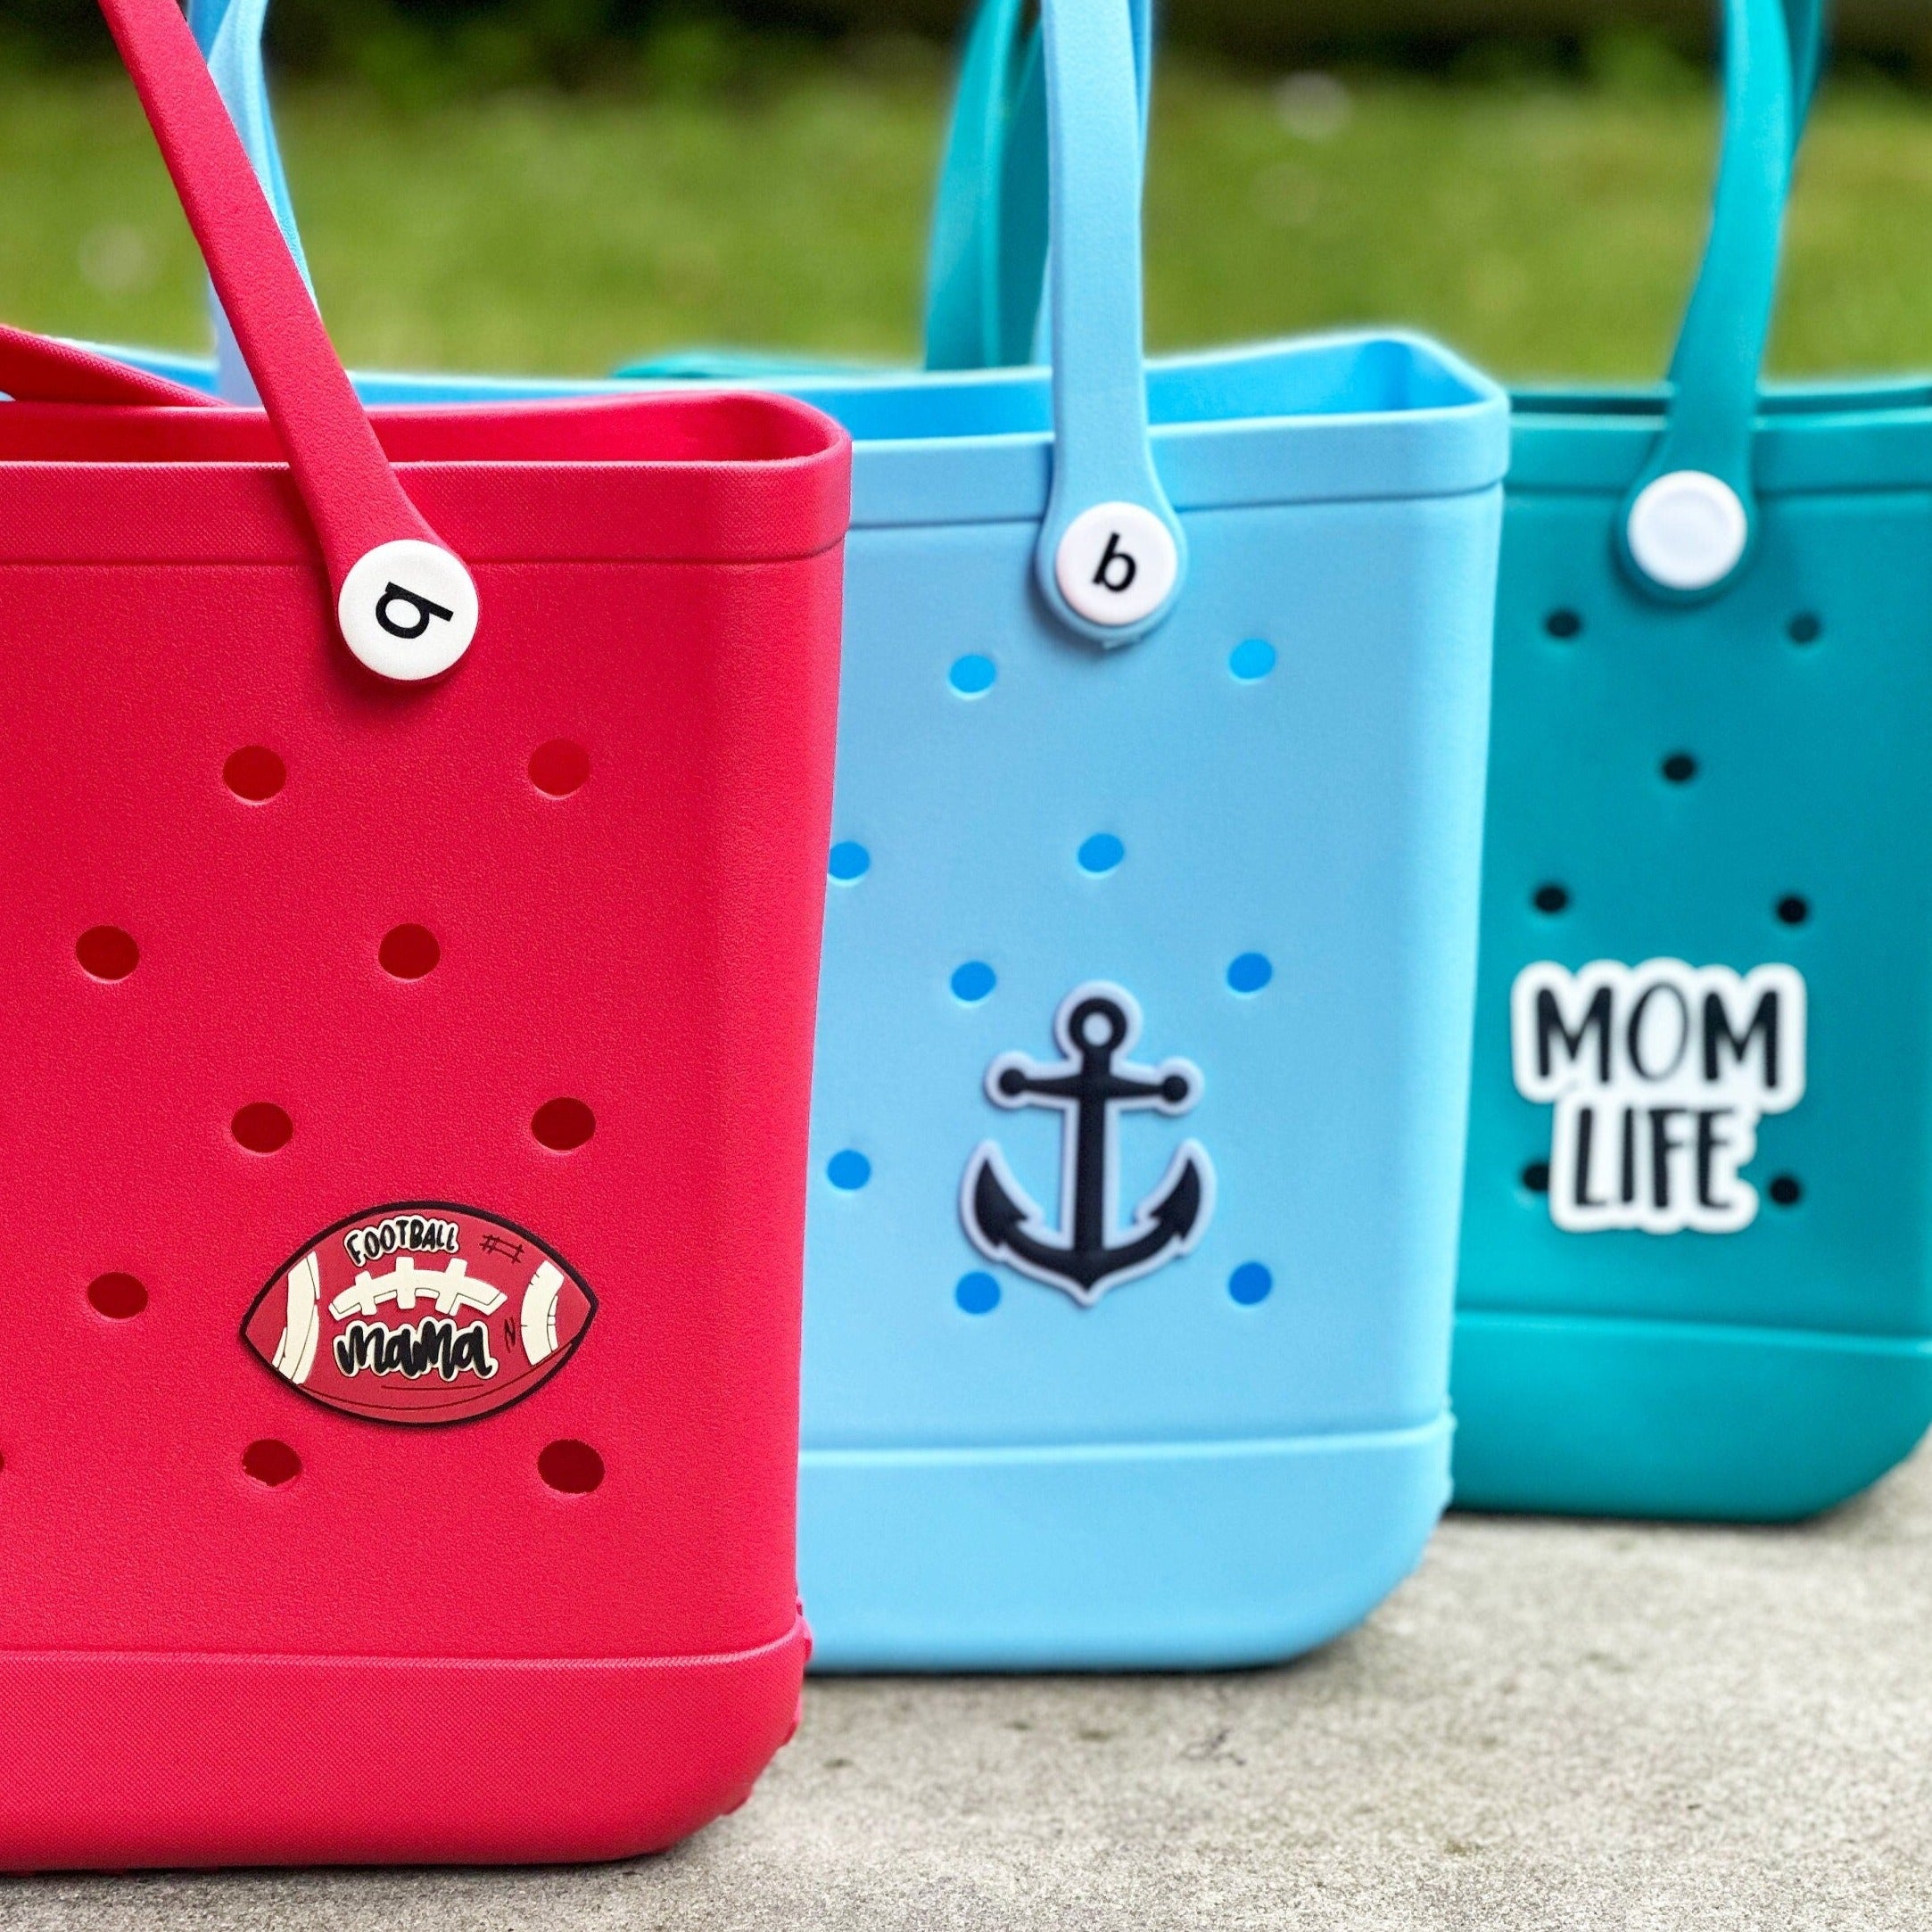 Bogg Bag Charms | Bogg Bits | Bogg Bag Accessories | Bogg Buttons | Bogg Bits | Simply Southern | Mom Life | Football Mom | Anchor